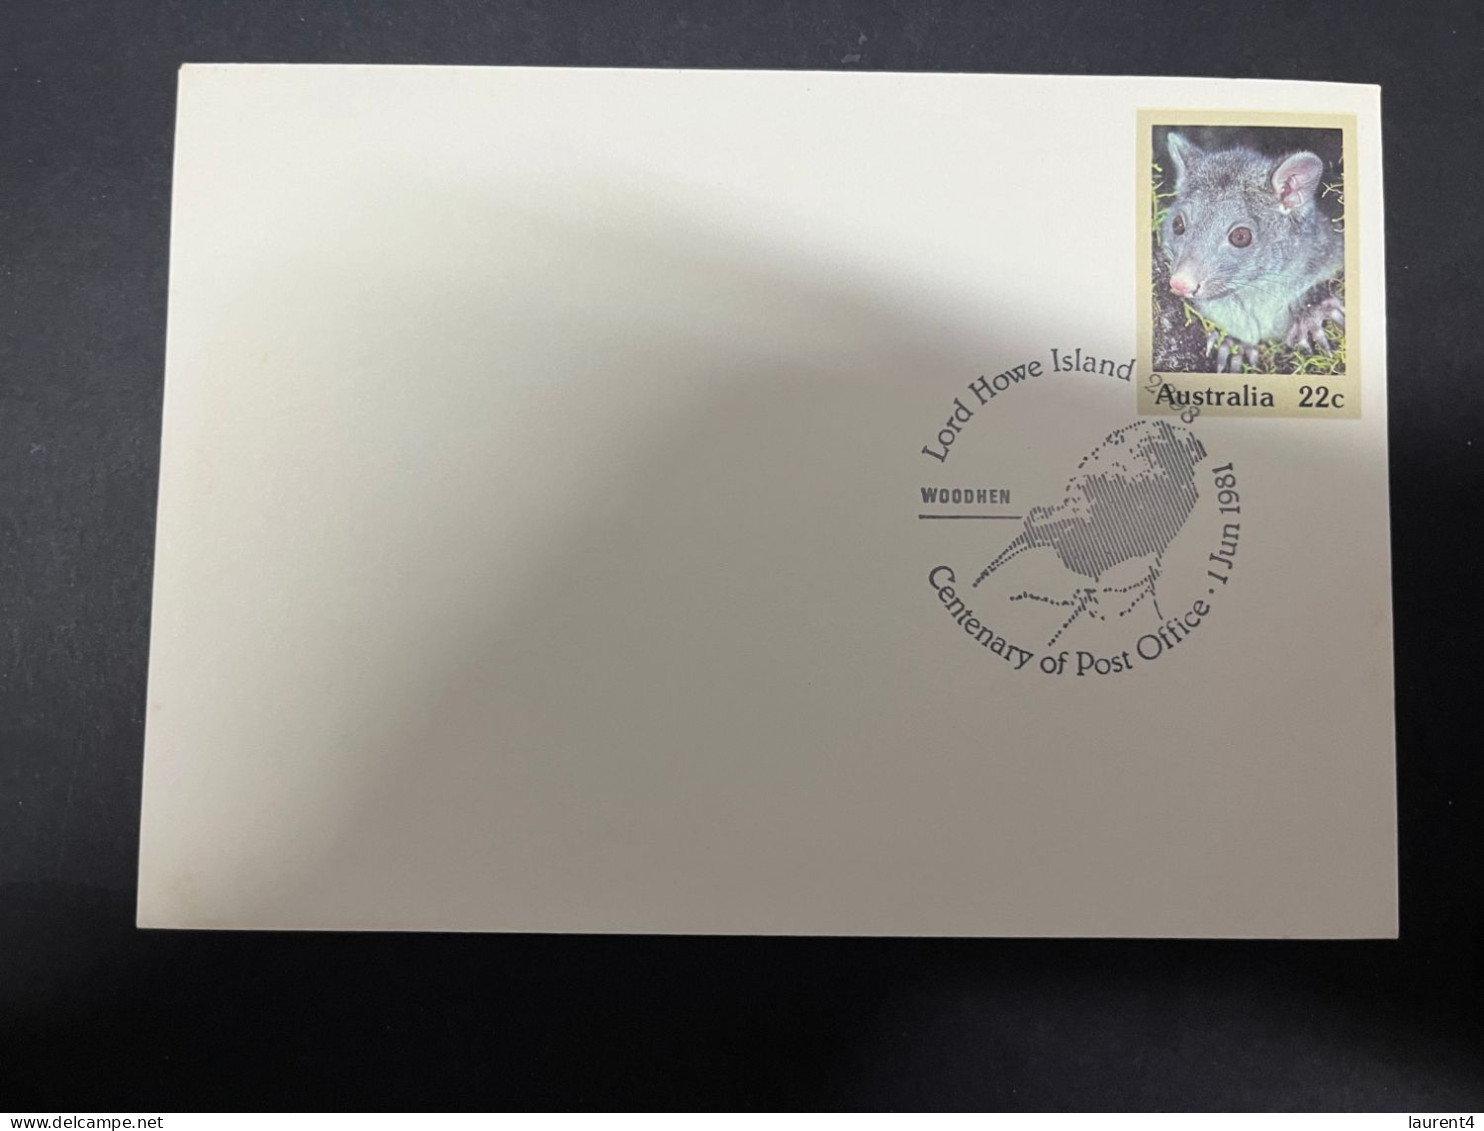 21-5-2024 (5 Z 44) Australia FDC - 3 Covers - Lord Howe Island (1981 Woodhen Special P/m) - Premiers Jours (FDC)